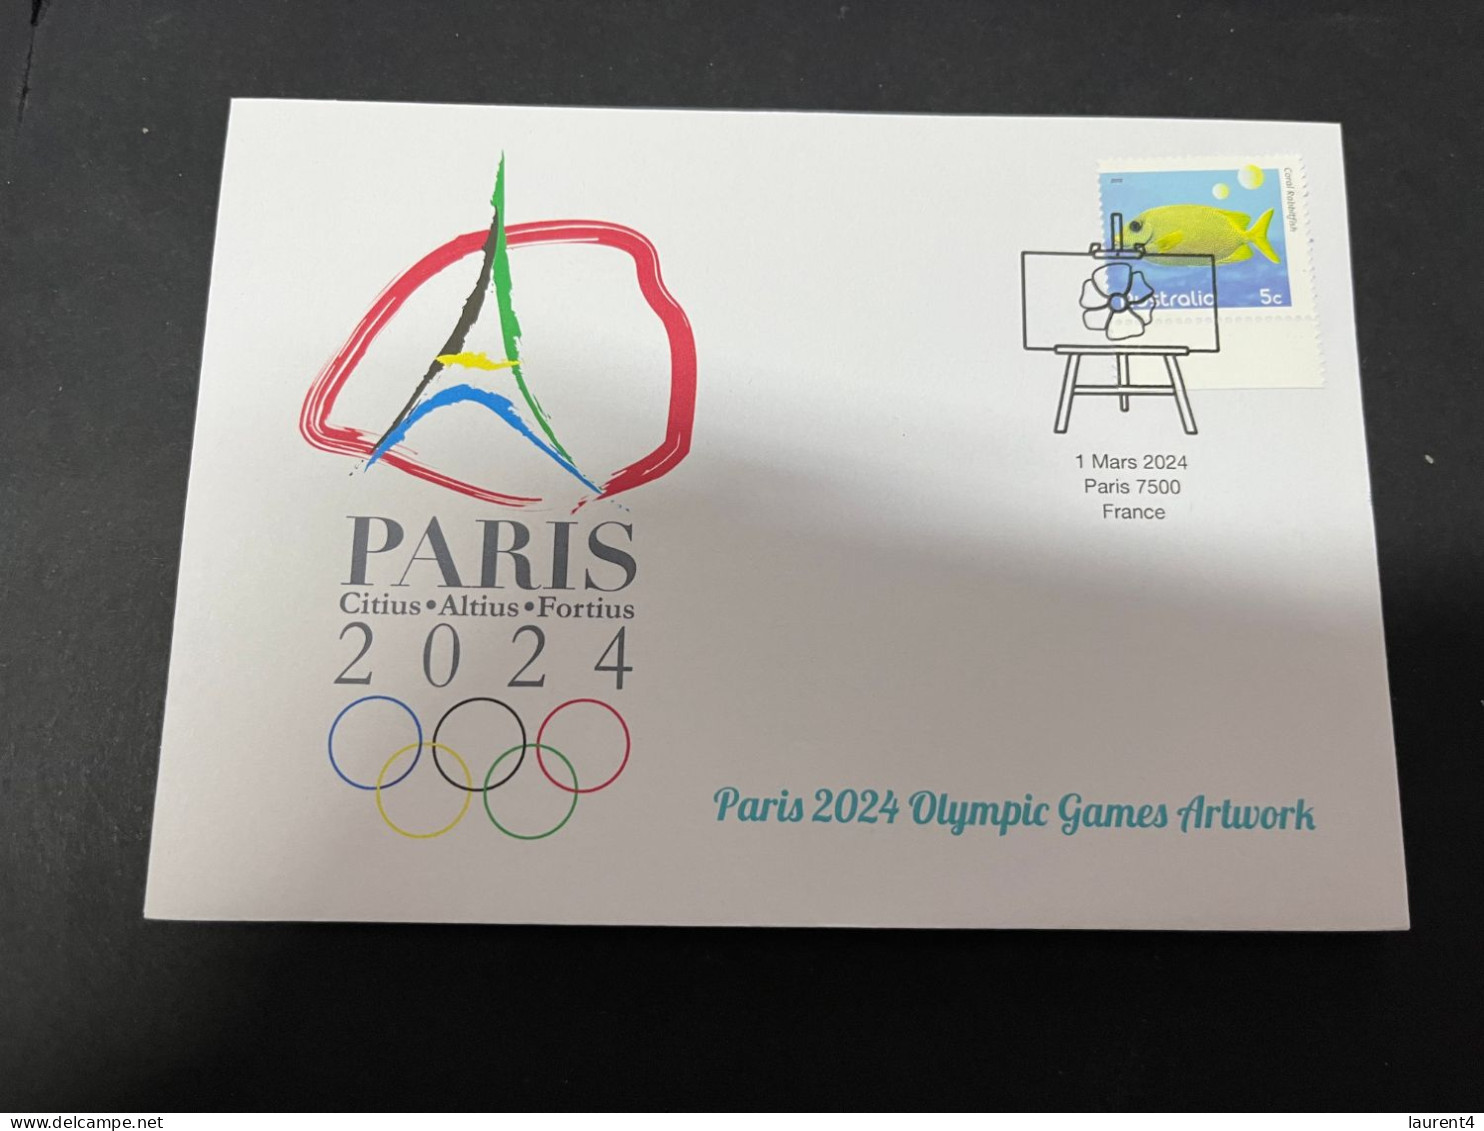 8-3-2024 (2 Y 30) Paris Olympic Games 2024 - 2 (of 12 Covers Series) For The Paris 2024 Olympic Games Artwork - Eté 2024 : Paris